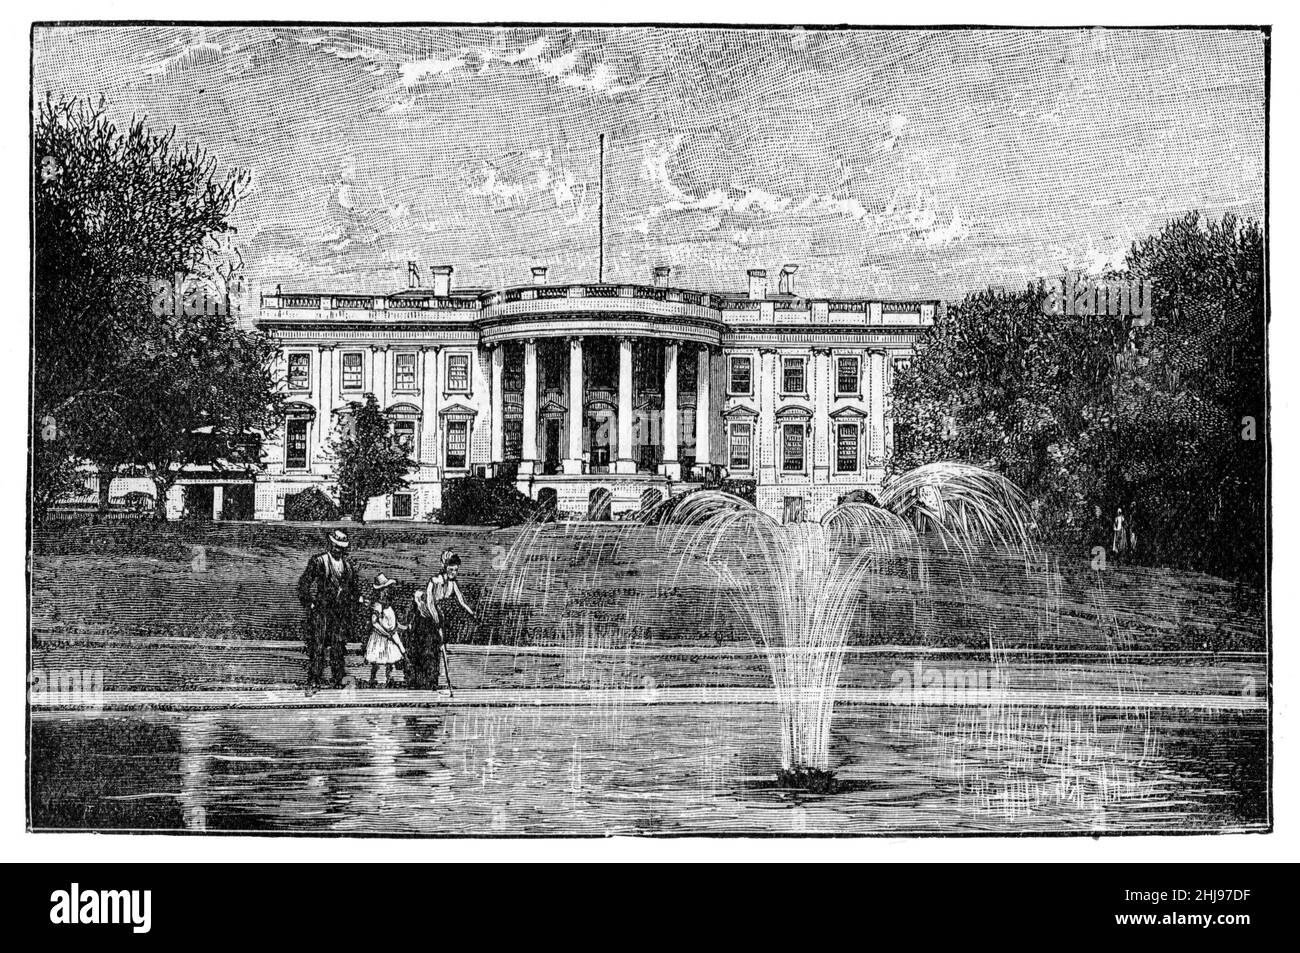 Black and White Illustration; The White House, Washington, USA at the end of the 19th century Stock Photo